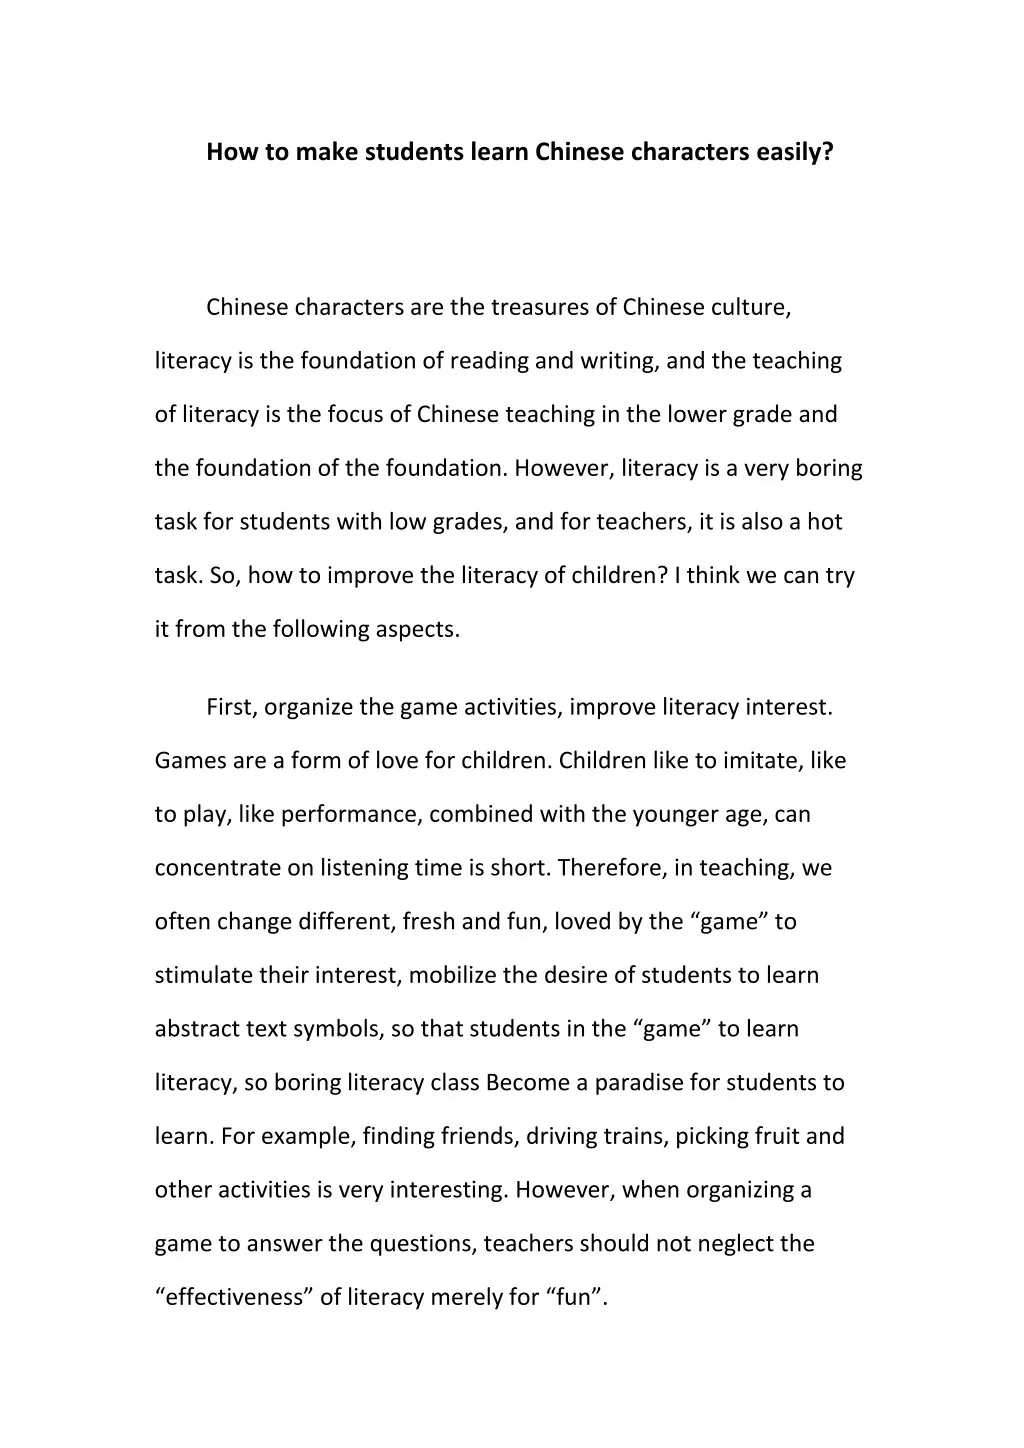 how to make students learn chinese characters